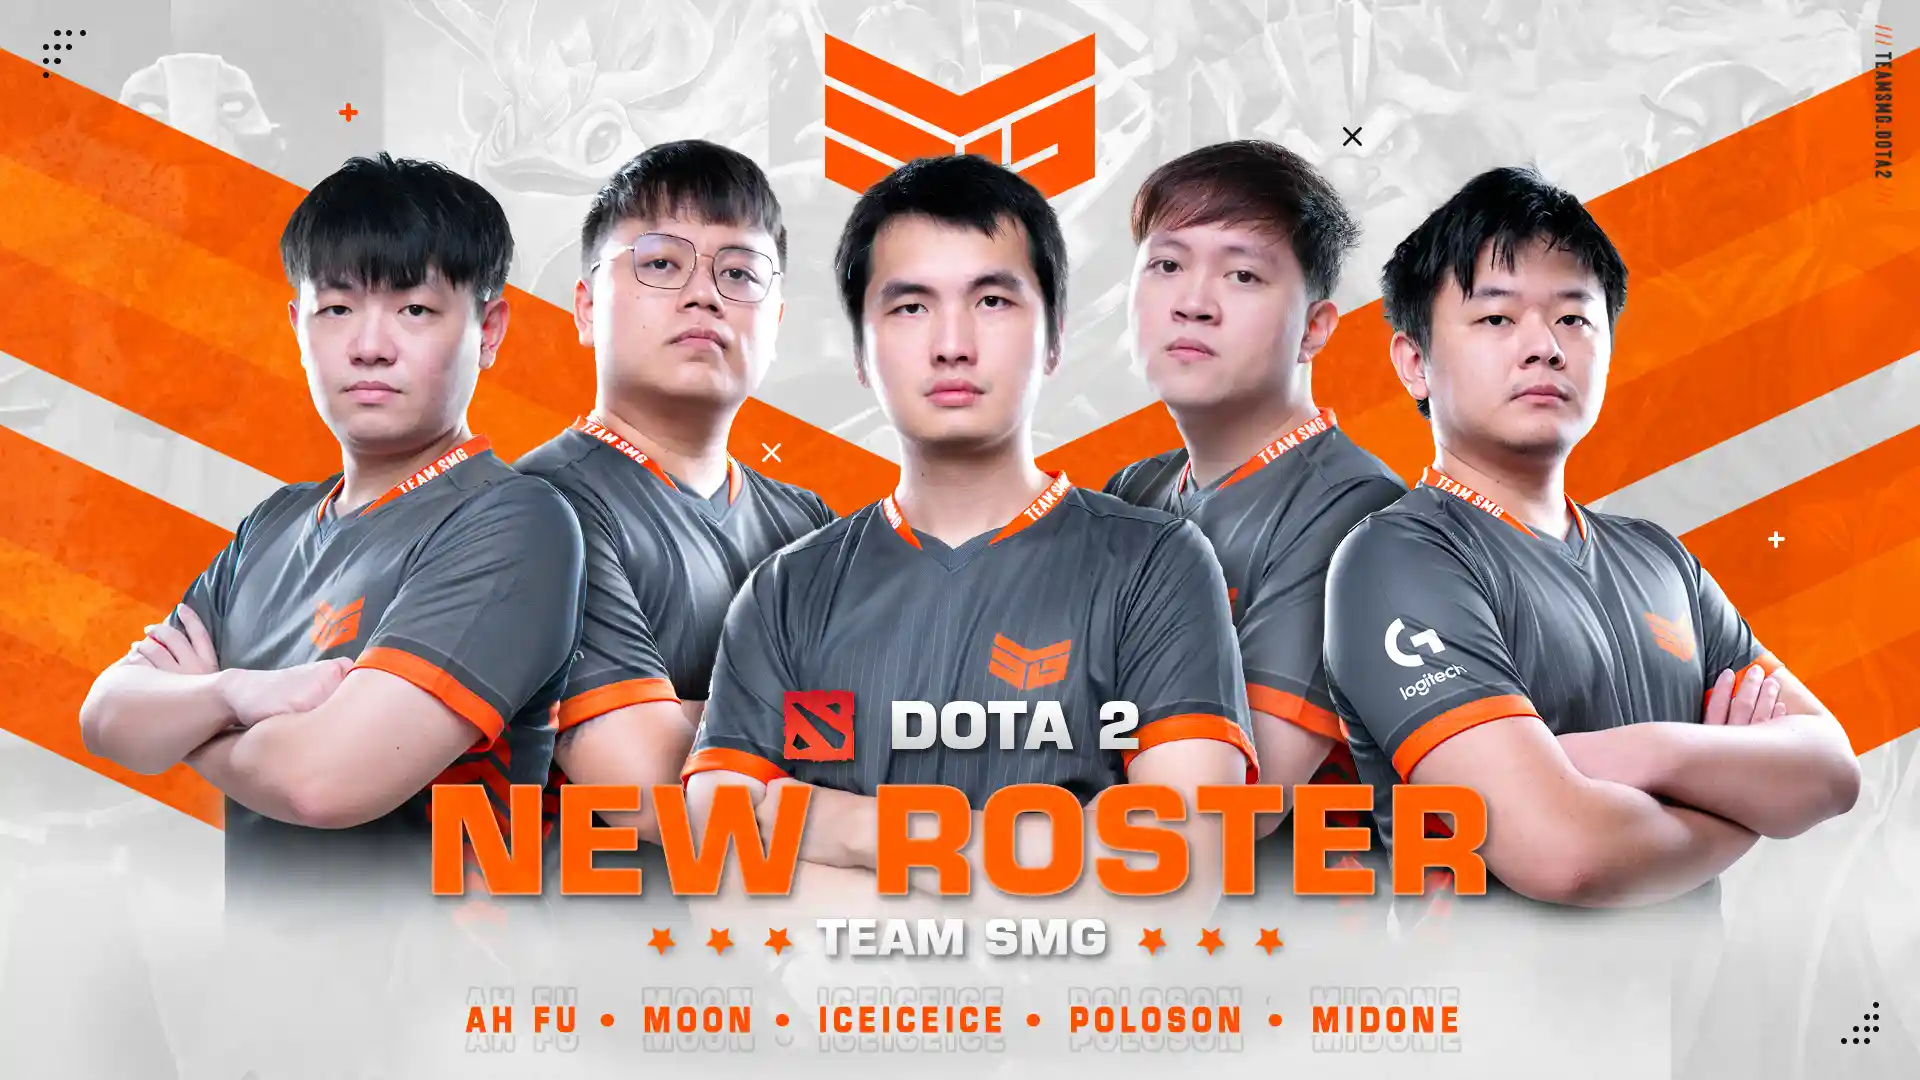 Dota 2 – Big Roster Changes for Vici Gaming & Team SMG